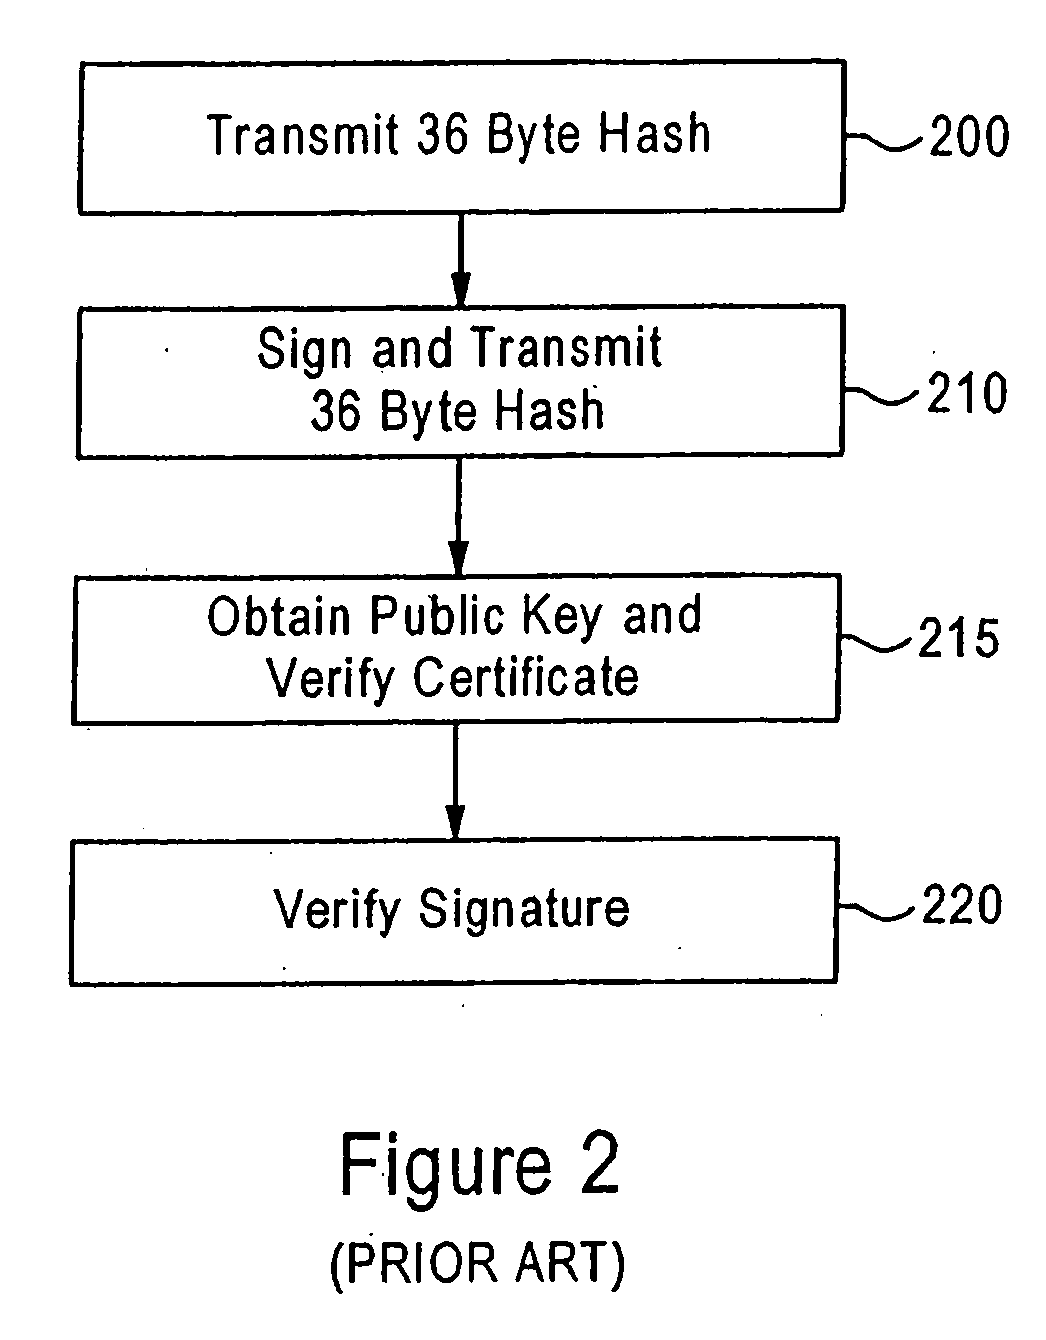 Laddered authentication security using split key asymmetric cryptography